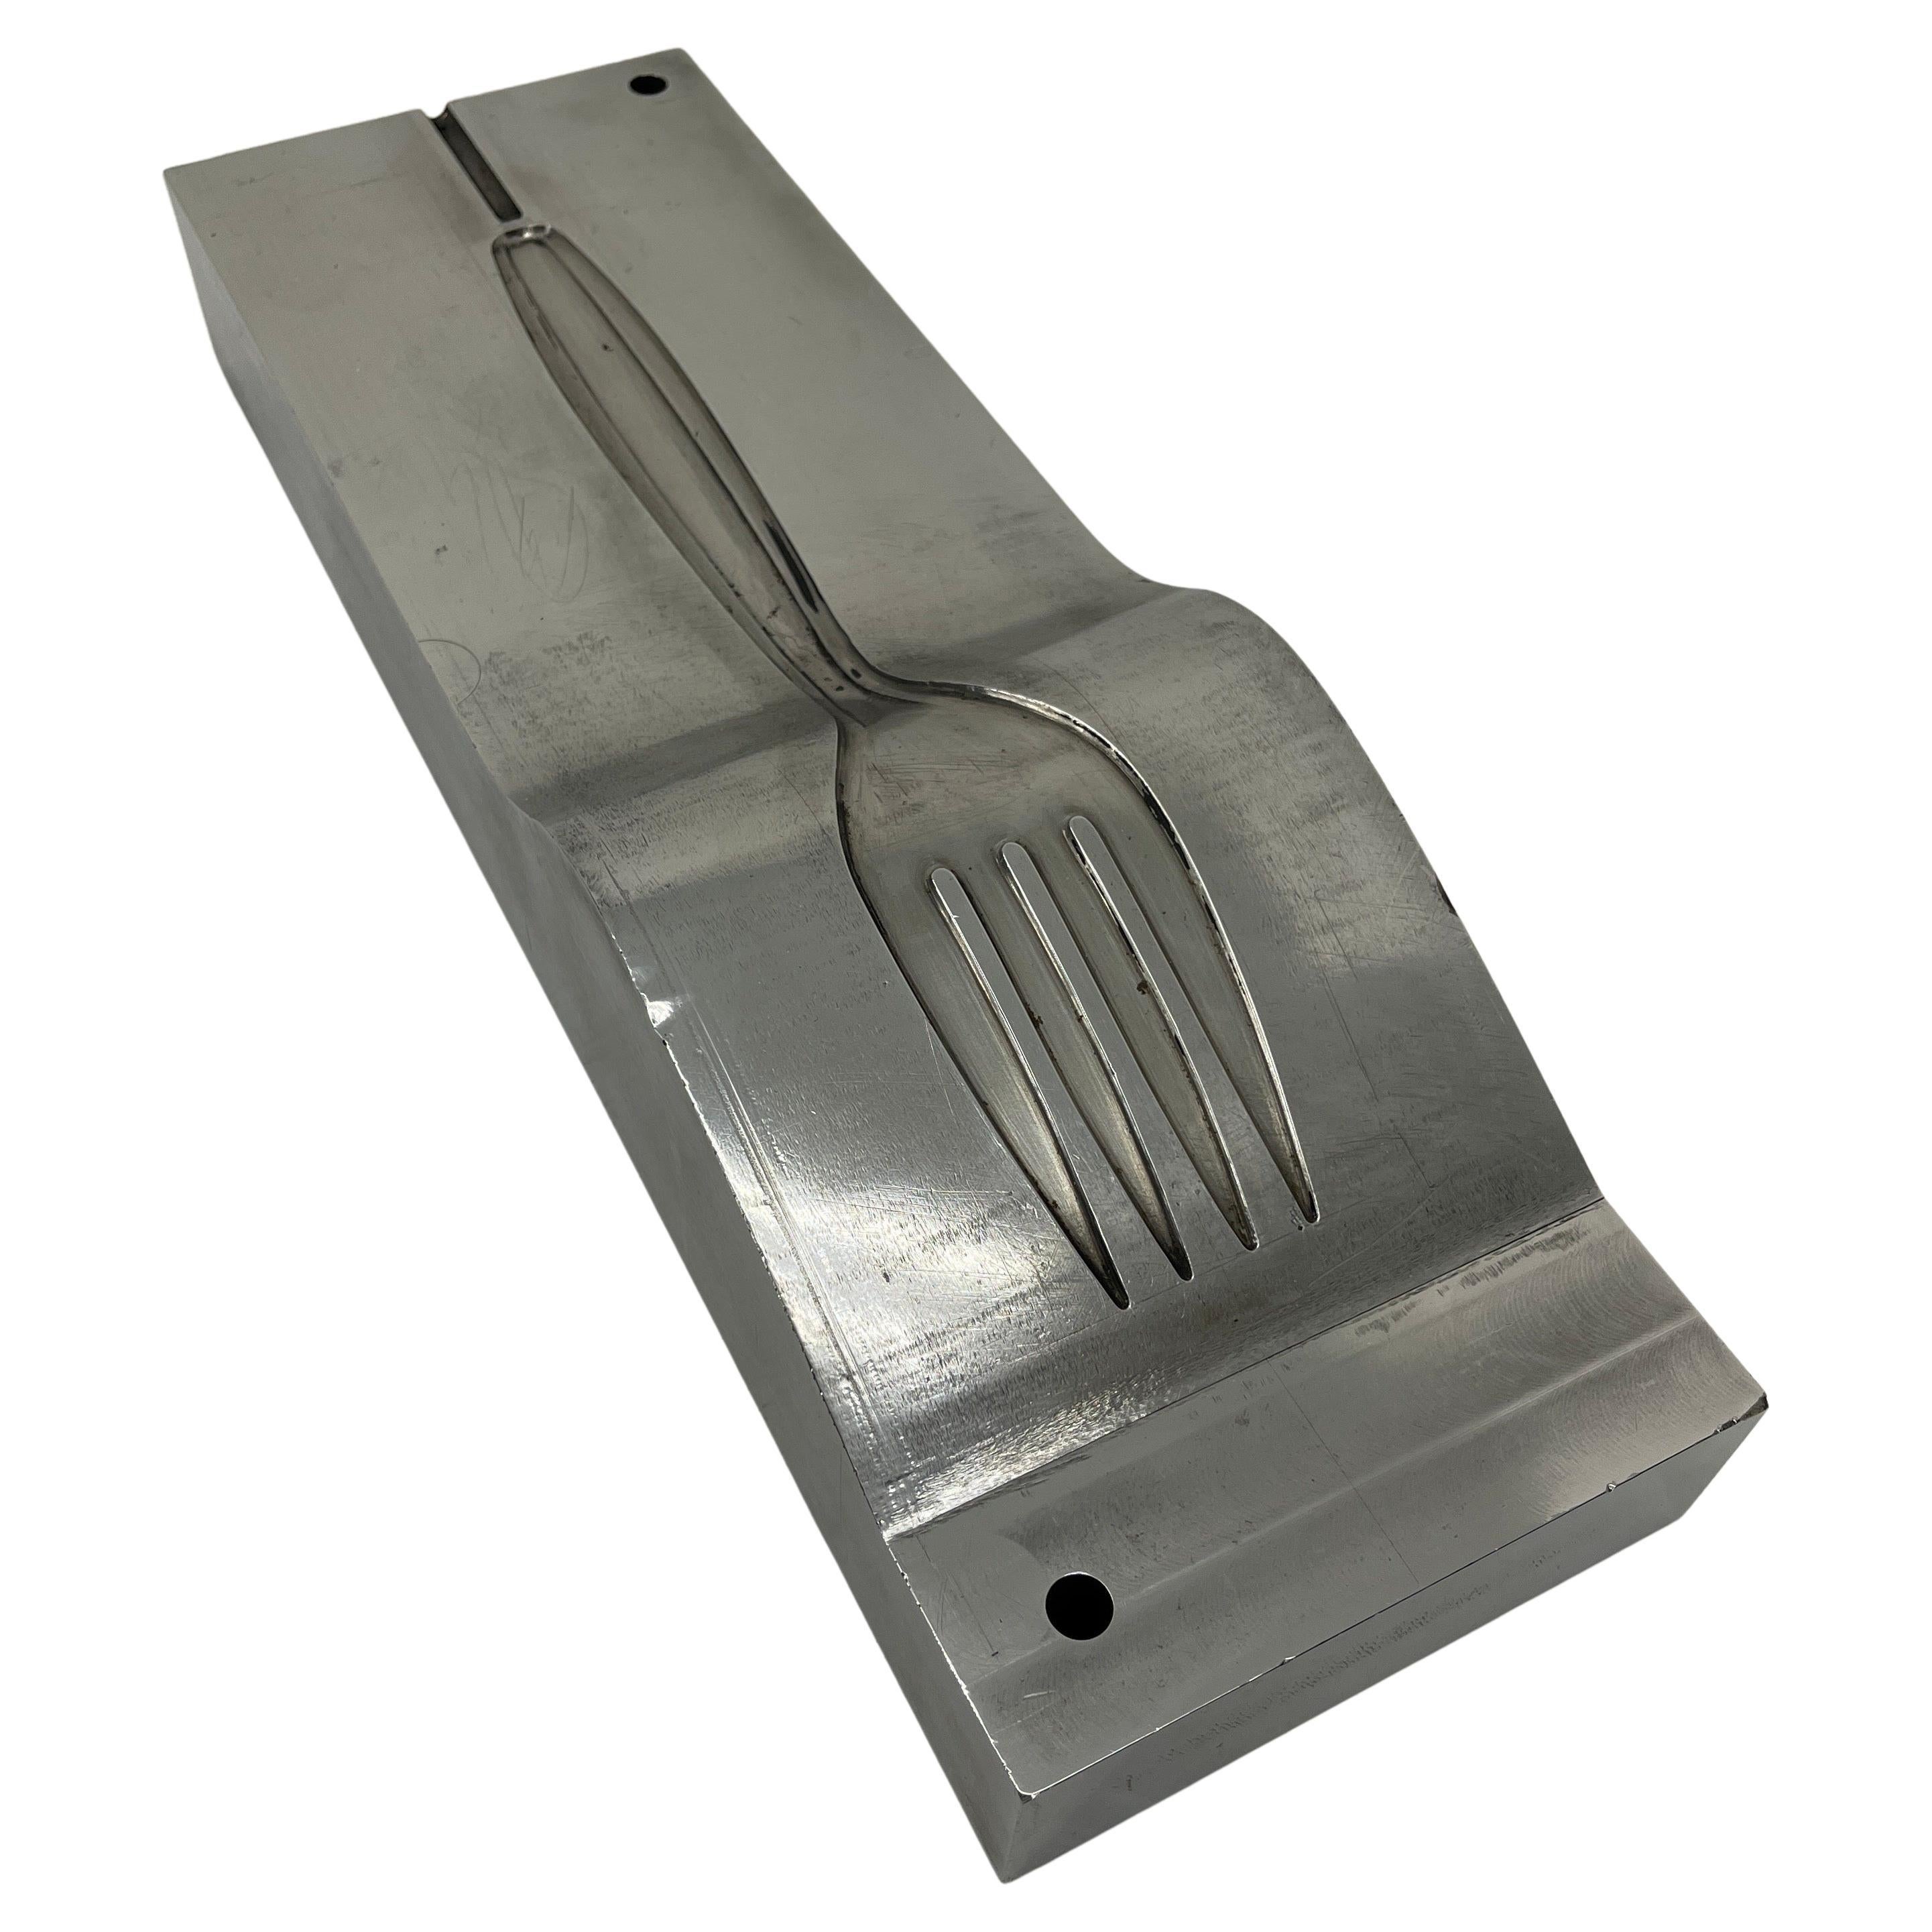 Large Stainless Steel Industrial Fork Mold Sculpture for Silverware